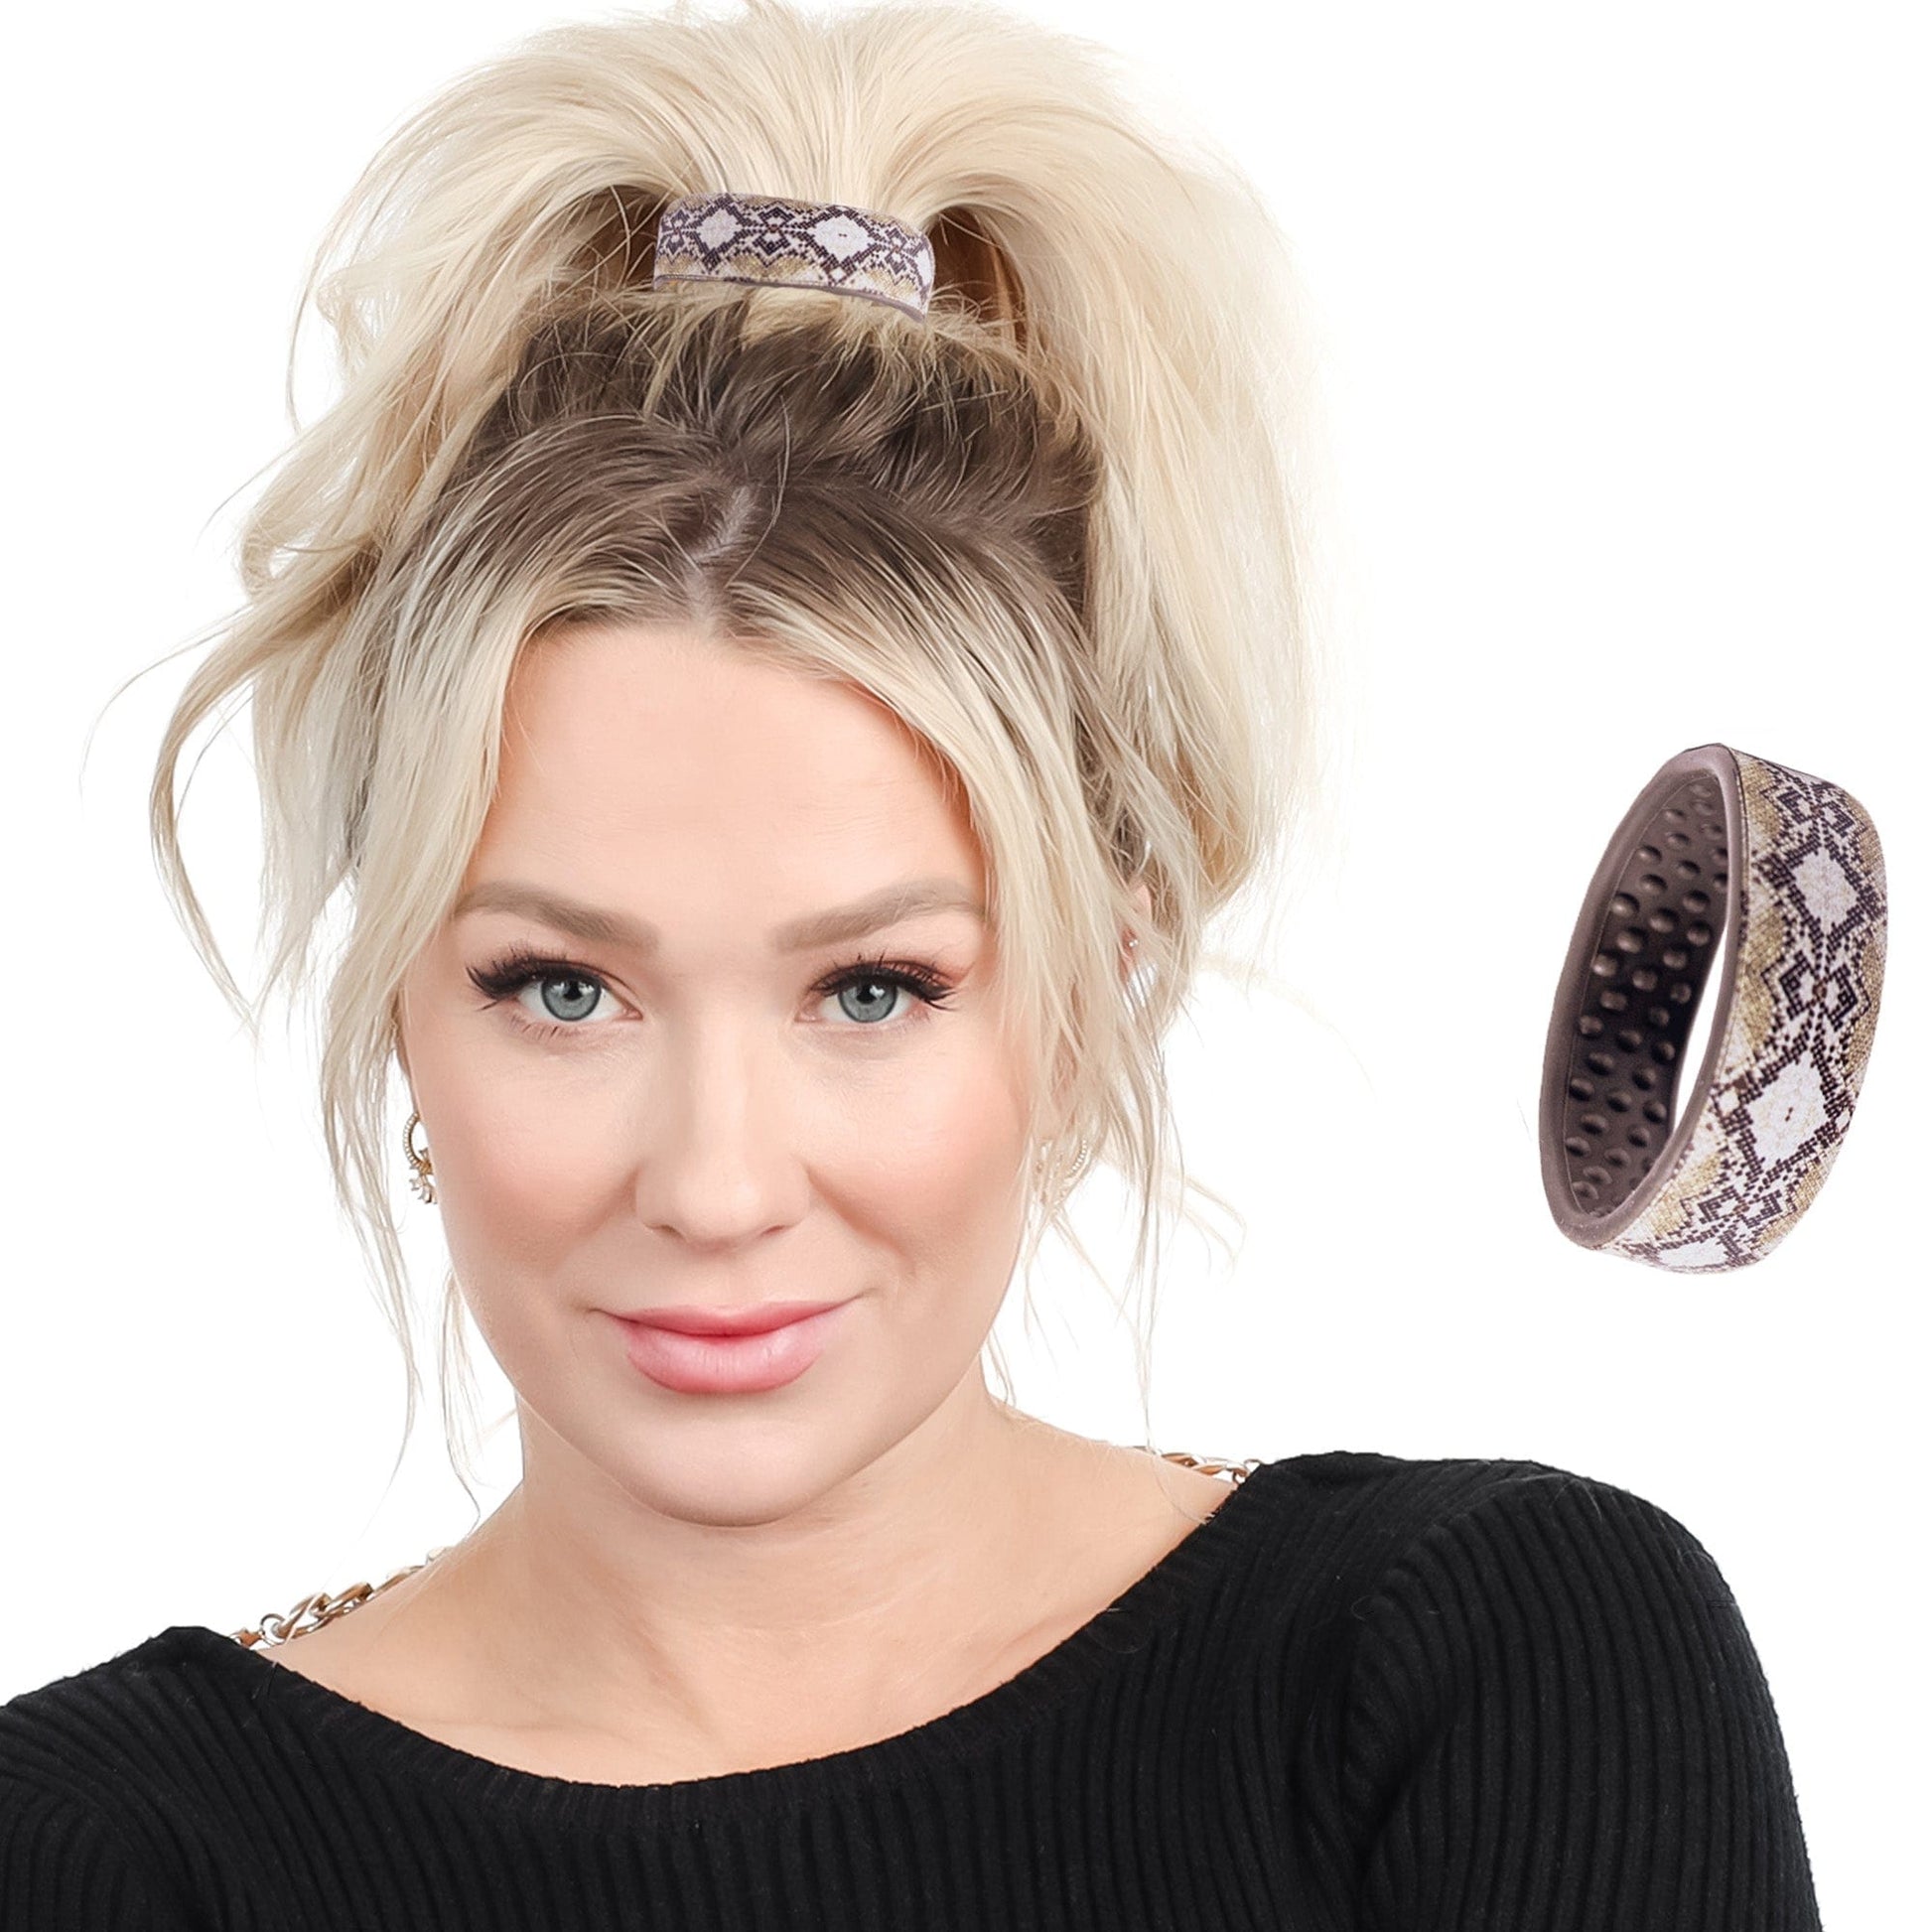 Snakeskin Limited Edition Designer PONY-O. This larger size is perfect for ponytails and all-up styles